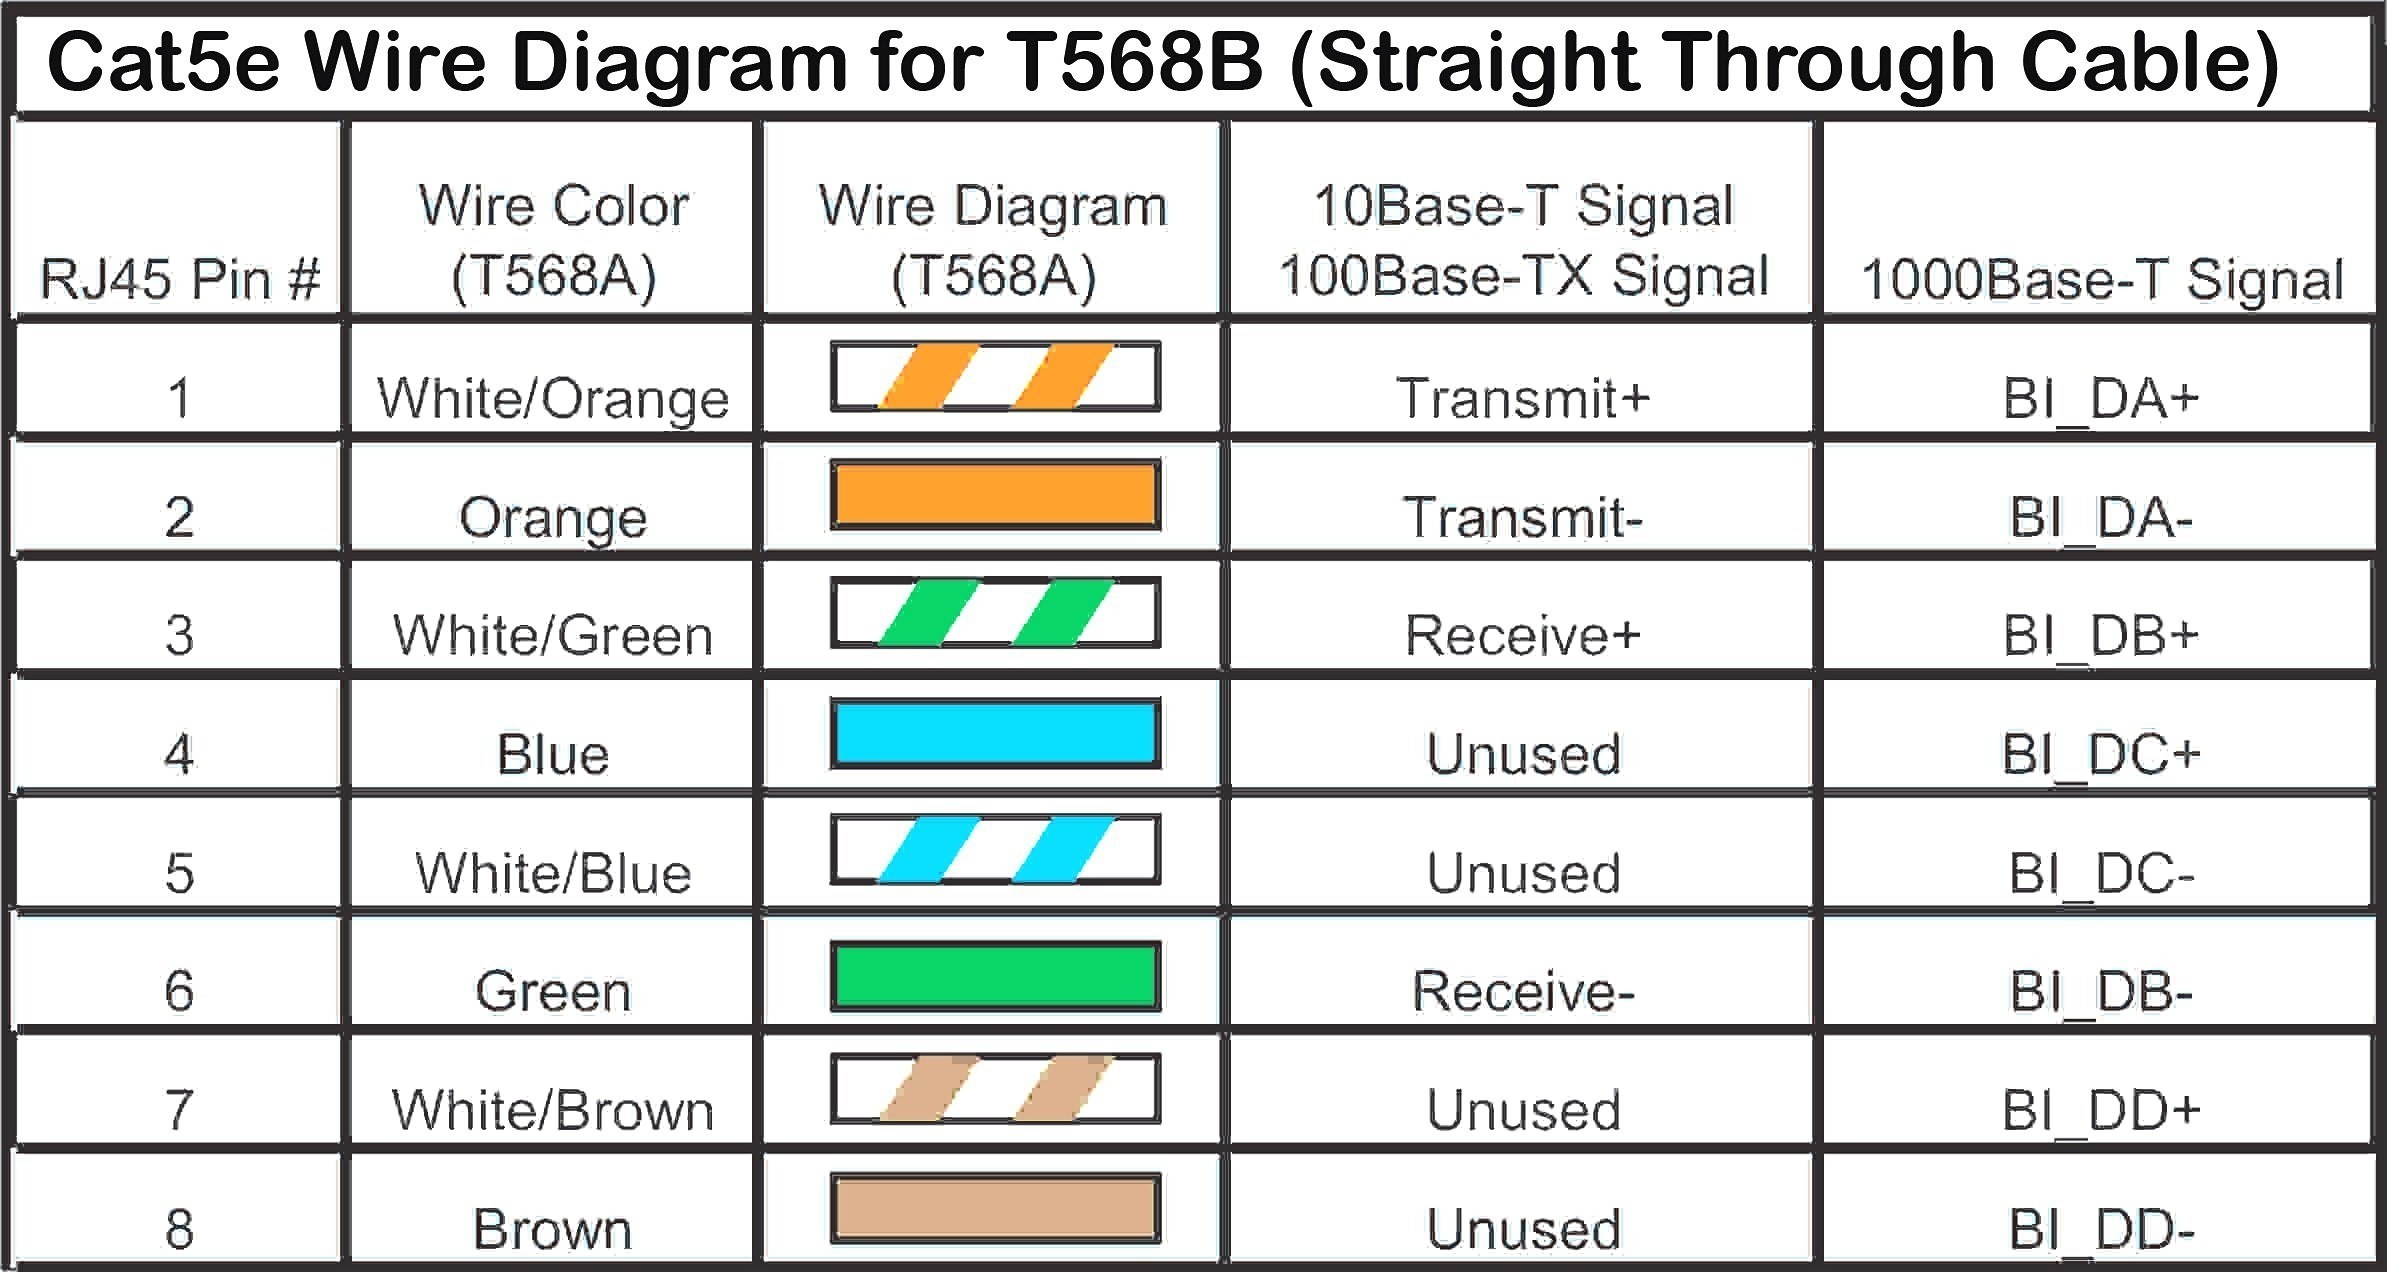 Wiring Diagram For Cat5 Patch Cable New Cat5e Wire Diagram New Ethernet Cable Wiring Diagram New Od Wiring